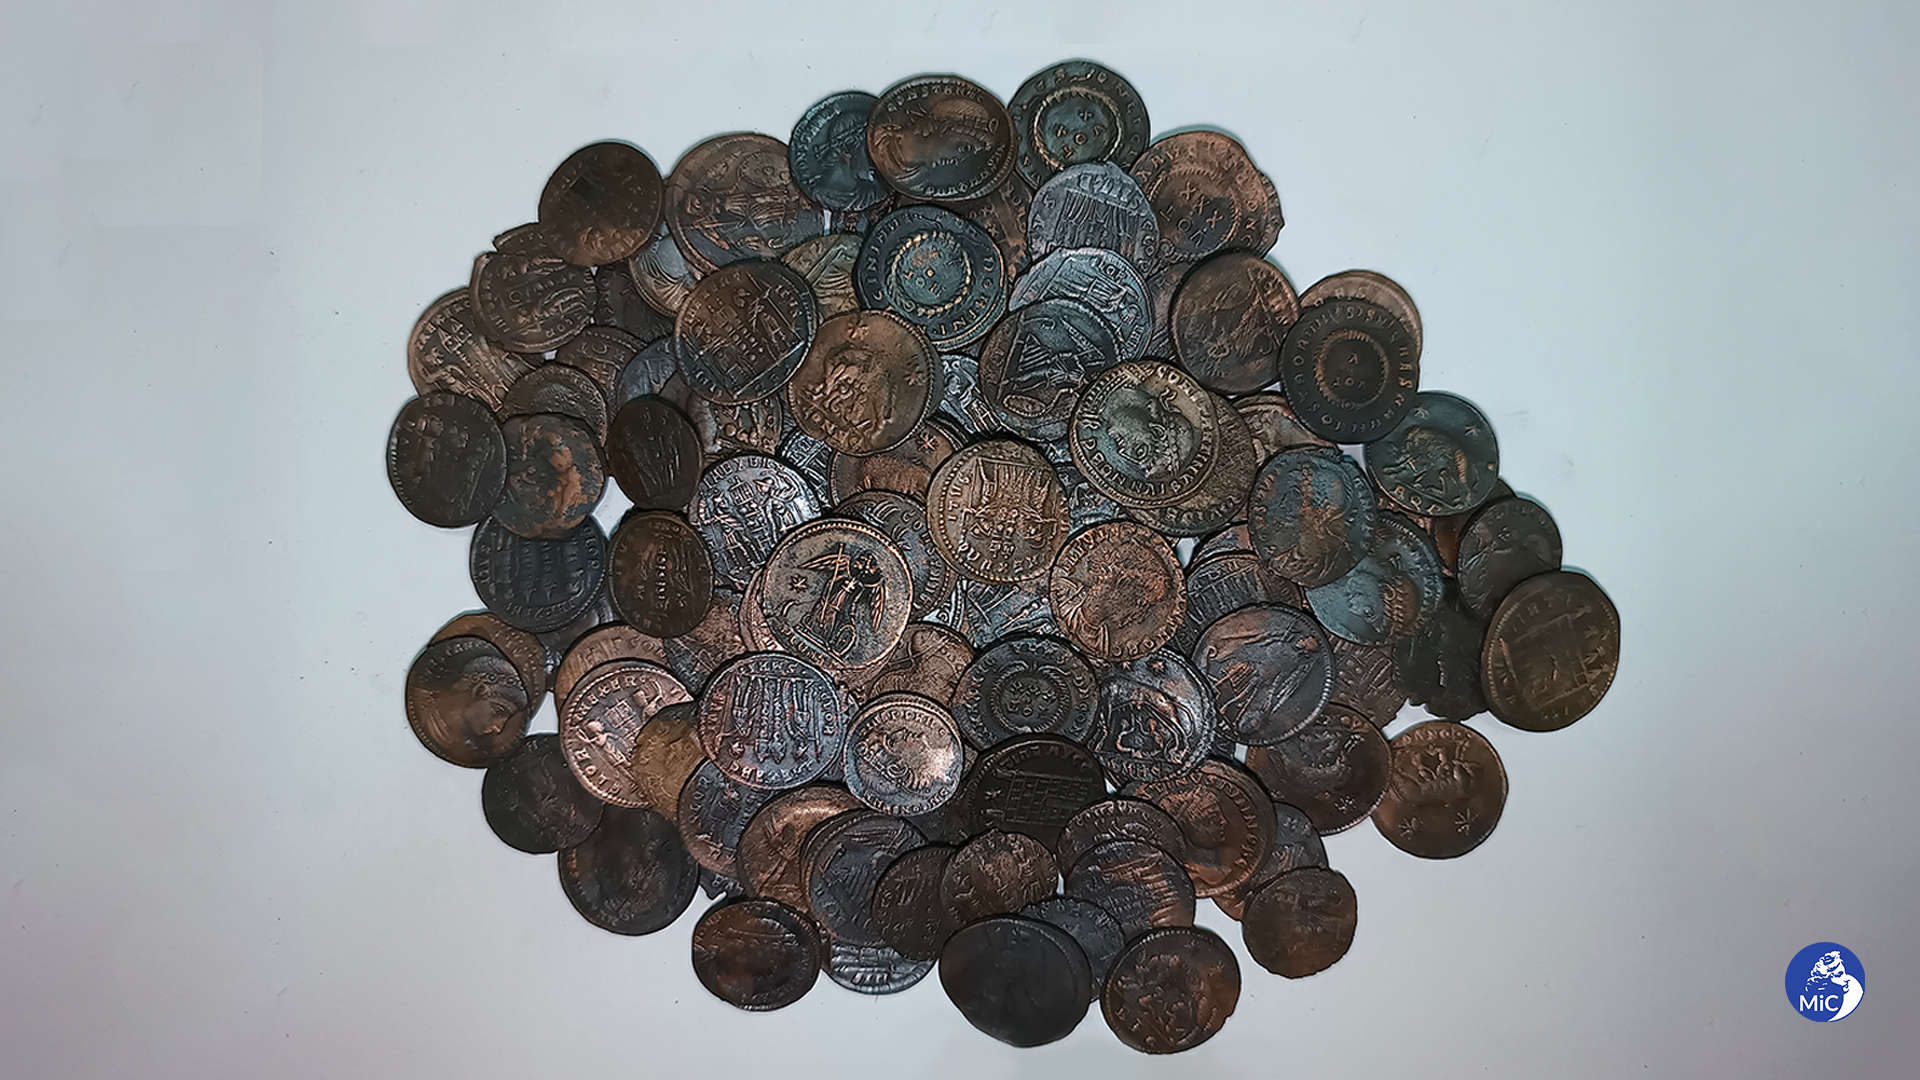 Extraordinary discovery in well-preserved treasure trove coins of huge Roman Sardinia